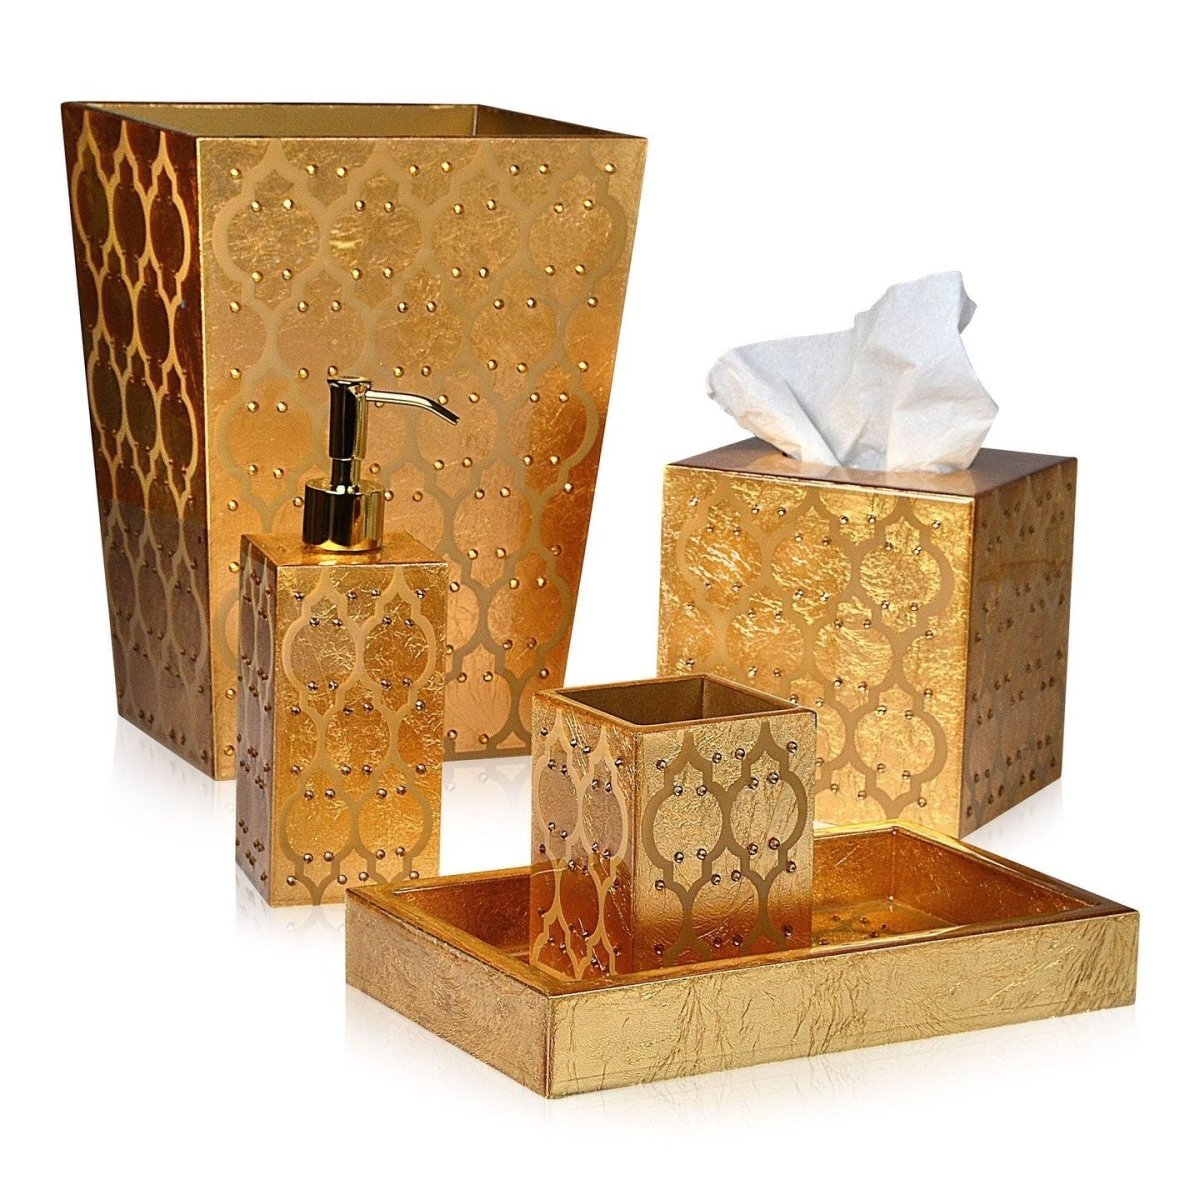 Bathroom Accessories - Arabesque Gold Bath Accessories by Mike + Ally at Fig Linens and Home